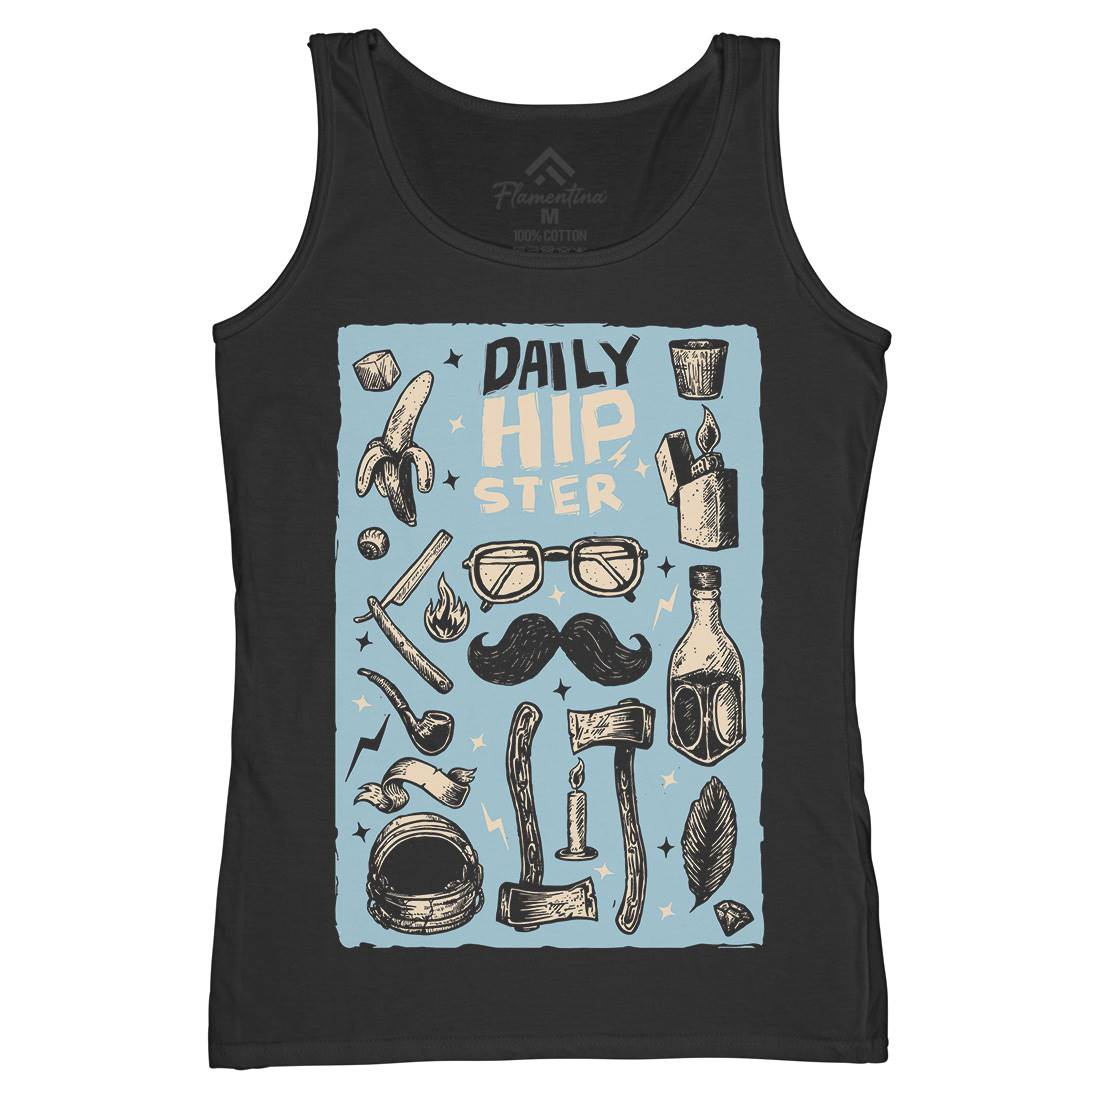 Daily Hipster Womens Organic Tank Top Vest Barber A544